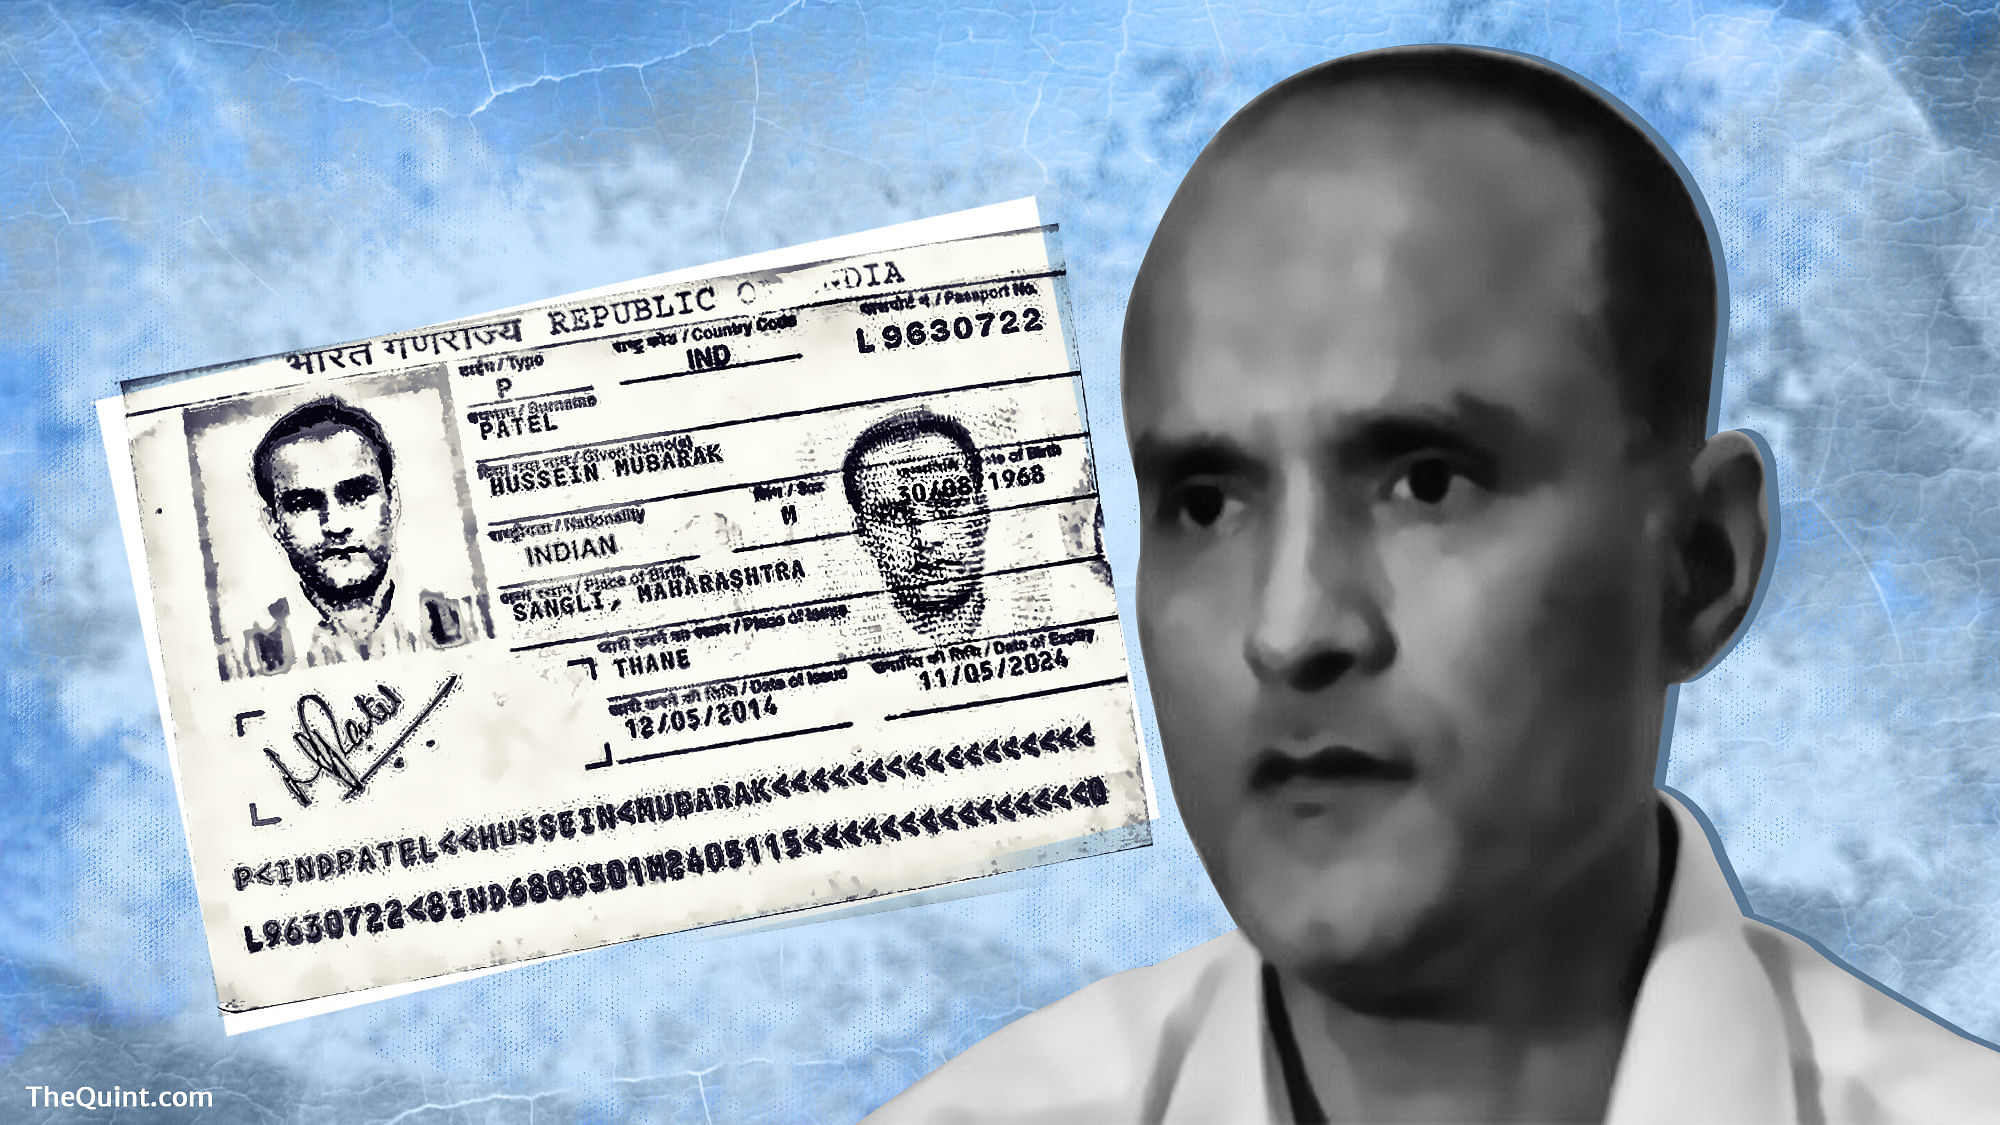 Kulbhushan Jadhav, who Islamabad claims is an Indian spy, had been sentenced to death by a Pakistani military court